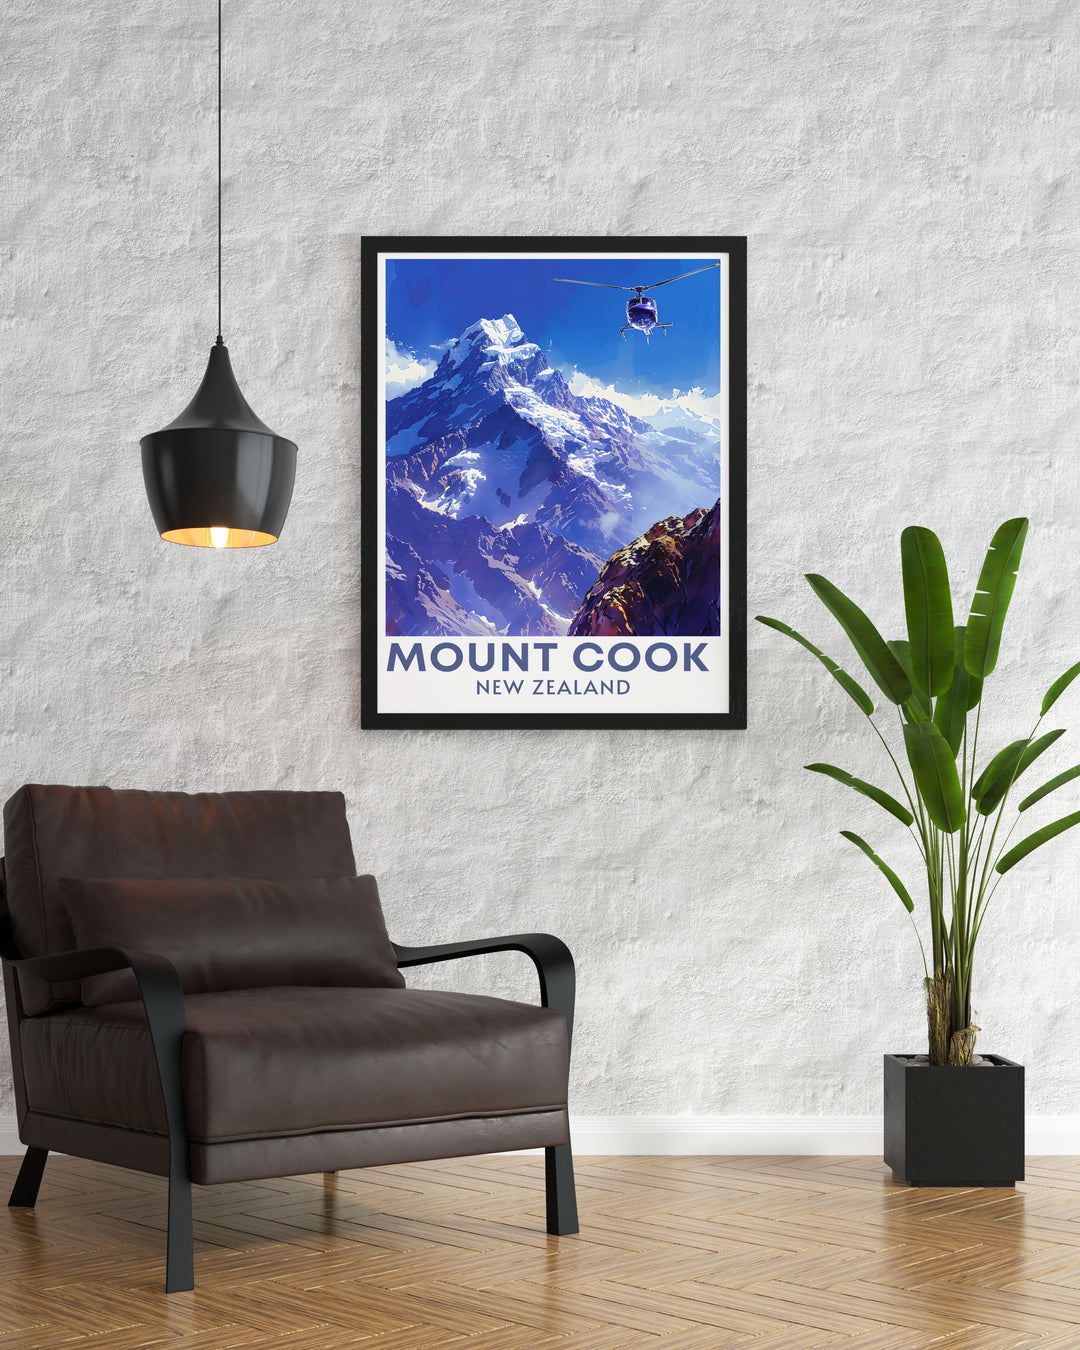 High quality Mt Cook prints showcasing Aoraki Mount Cook these national park prints are ideal for travel enthusiasts and nature lovers looking to bring the iconic landscapes of New Zealand into their homes with vivid colors and detailed illustrations